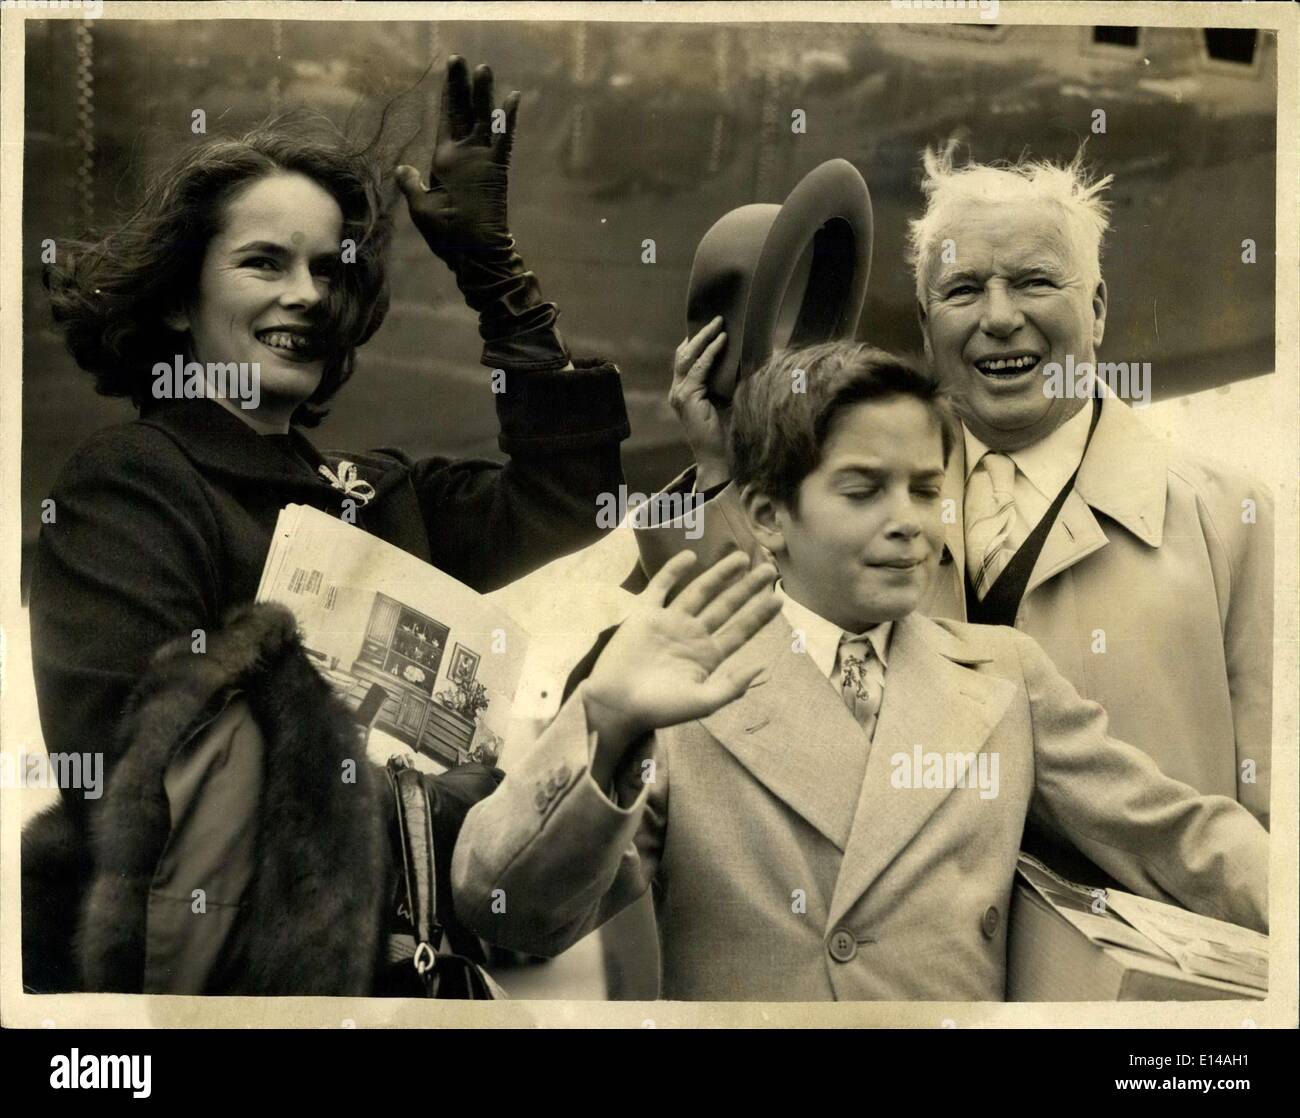 Apr. 17, 2012 - Charlie Chaplin and son arrive for film premiere: Charlie Chaplin with his wife Ocna and their son Michael aged Stock Photo